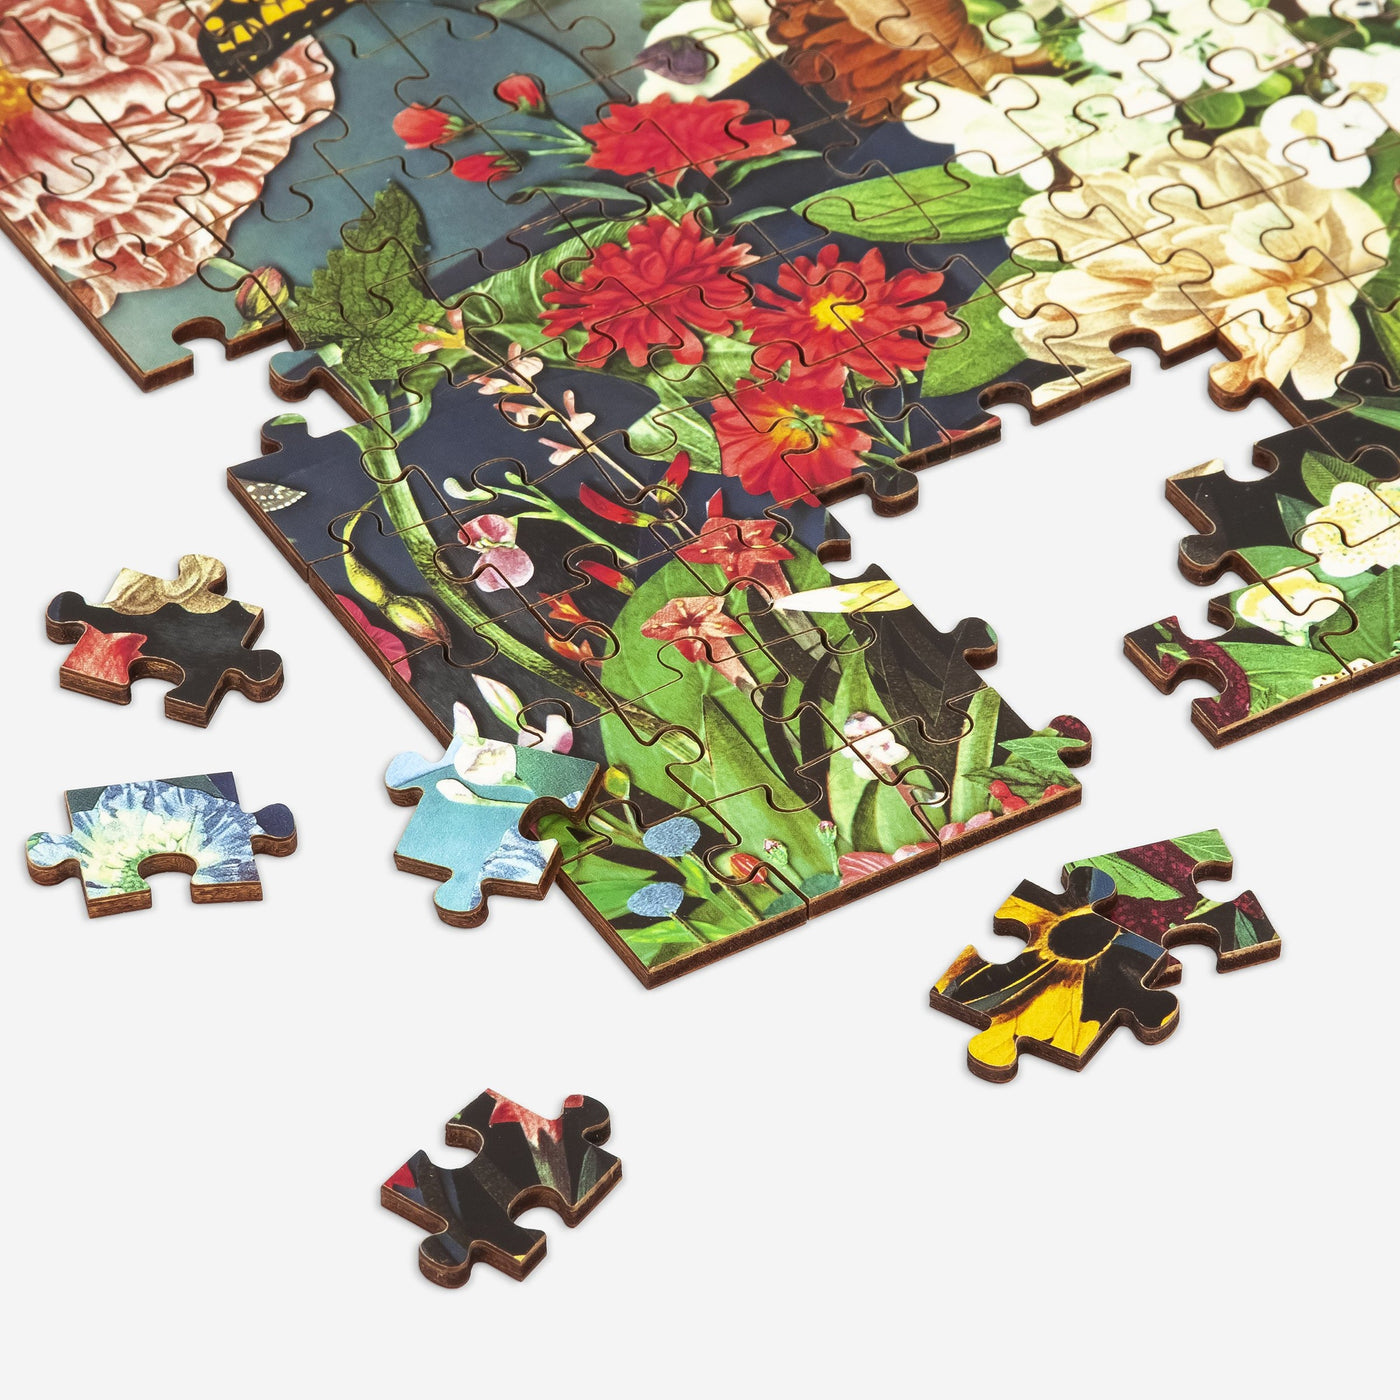 Butterfly Blooms | 144 Piece Wood Jigsaw Puzzle